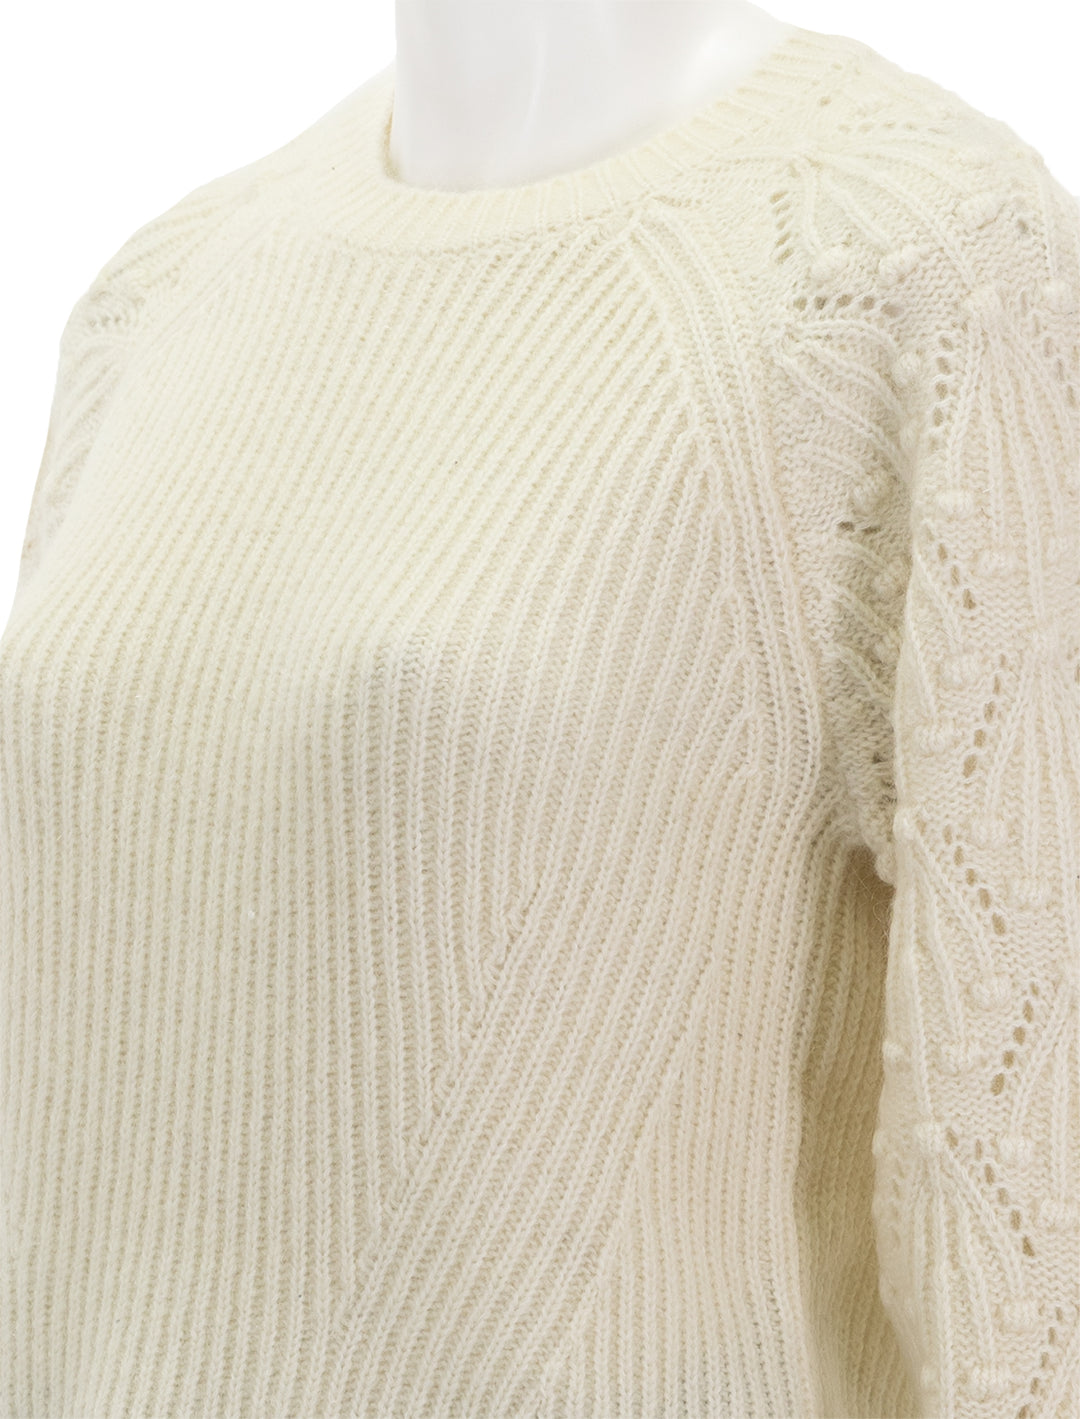 Close-up view of Splendid's rayne sweater in snow.